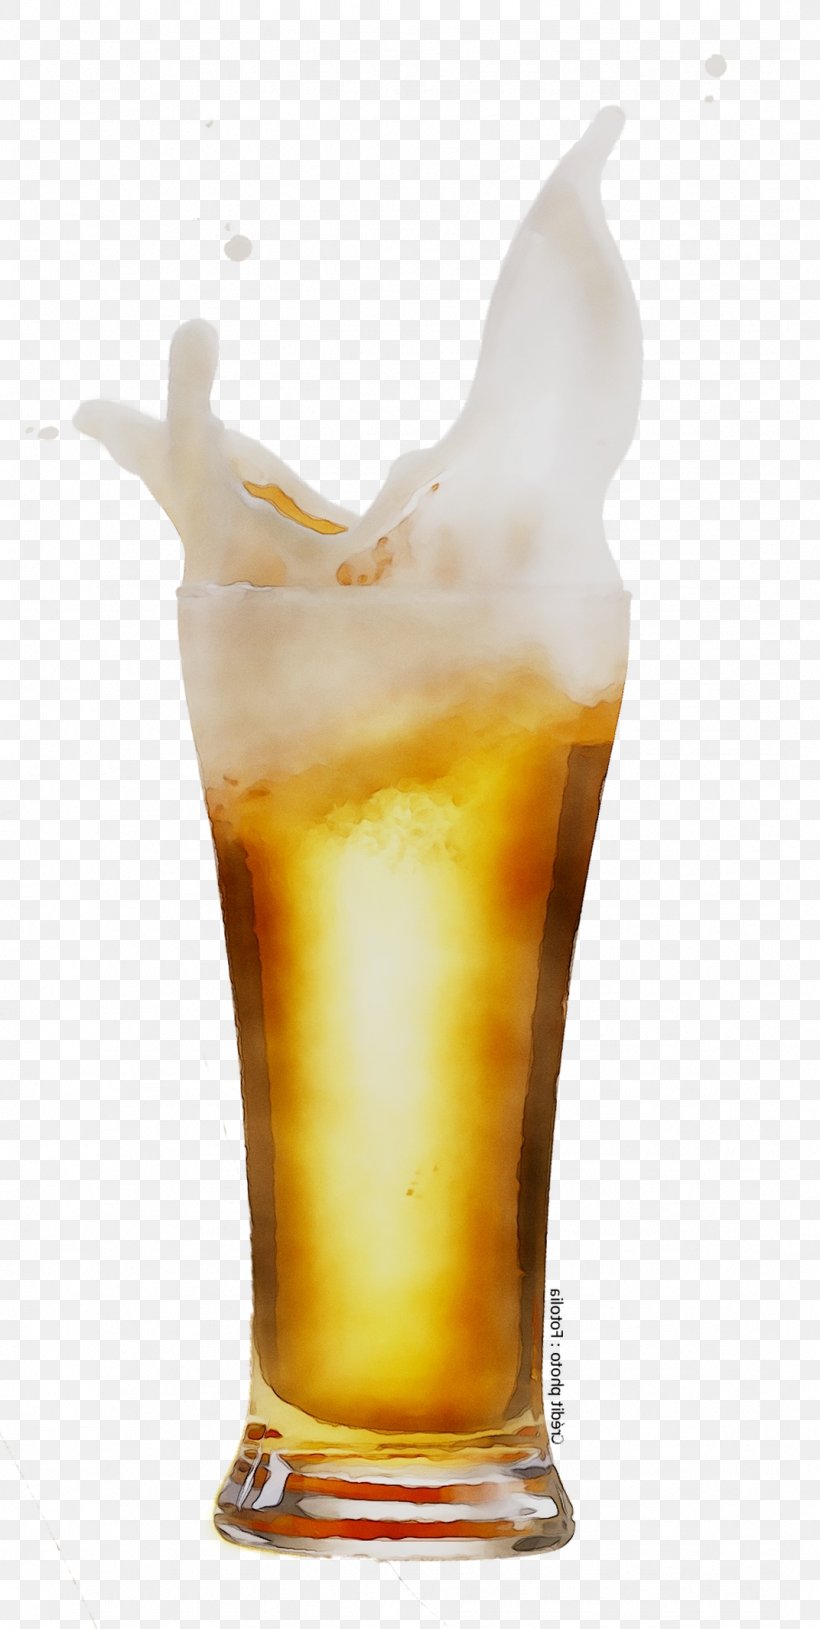 Non-alcoholic Drink Iced Tea Beer Glasses Sweetened Beverage, PNG, 1072x2130px, Nonalcoholic Drink, Alcoholic Beverage, Beer, Beer Cocktail, Beer Glass Download Free